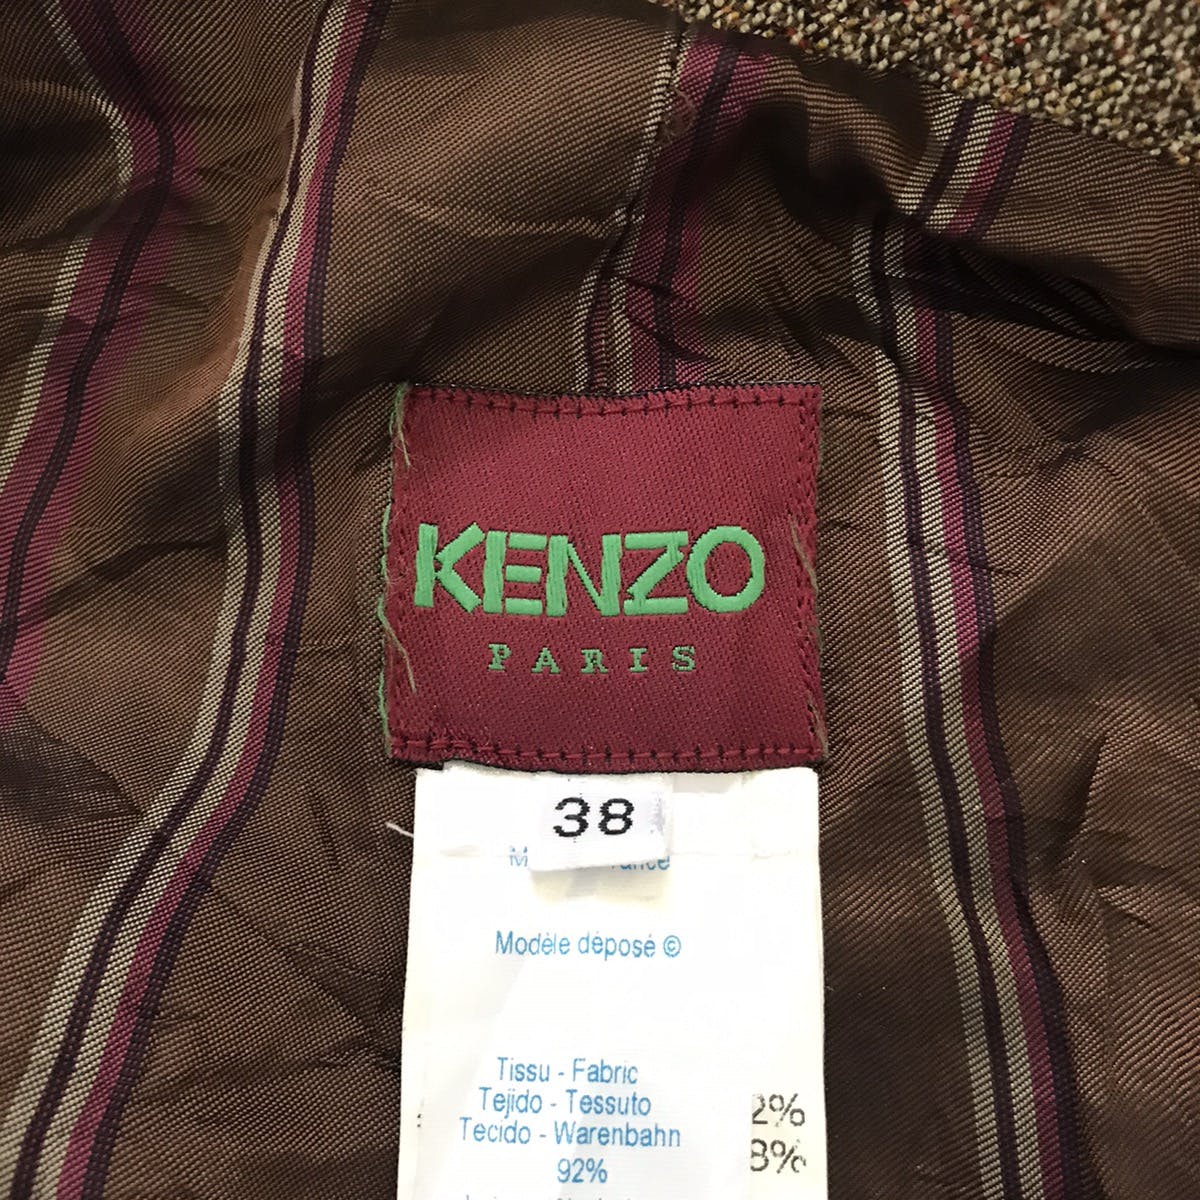 Kenzo Paris Wool Jacket With Cargo Pockets Made in France - 10